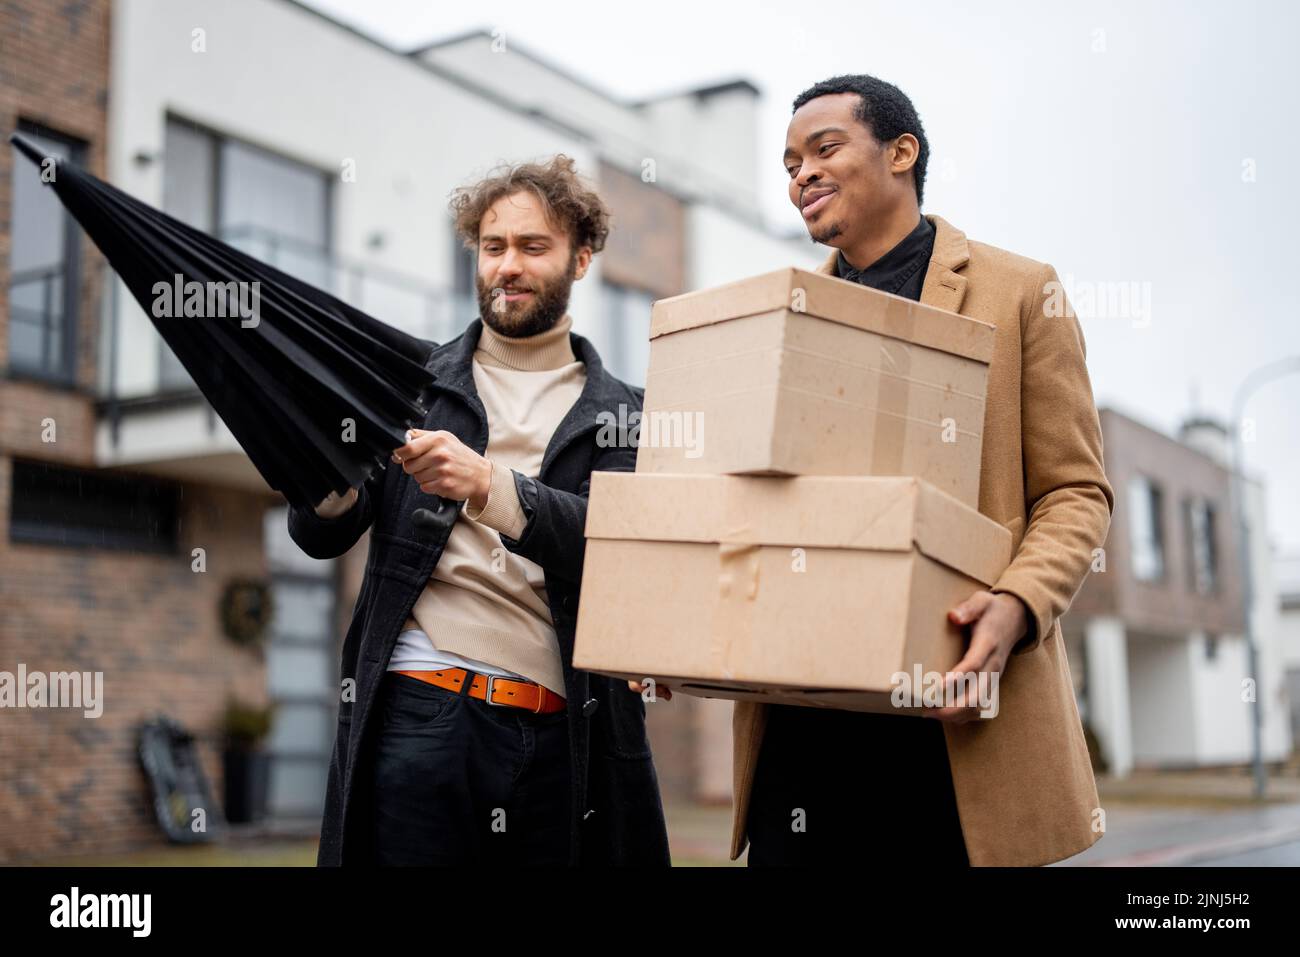 Stylish gay couple walking together with parcels on some residential street on rainy weather. Caucasian and hispanic man with umbrella wearing coats. Stock Photo